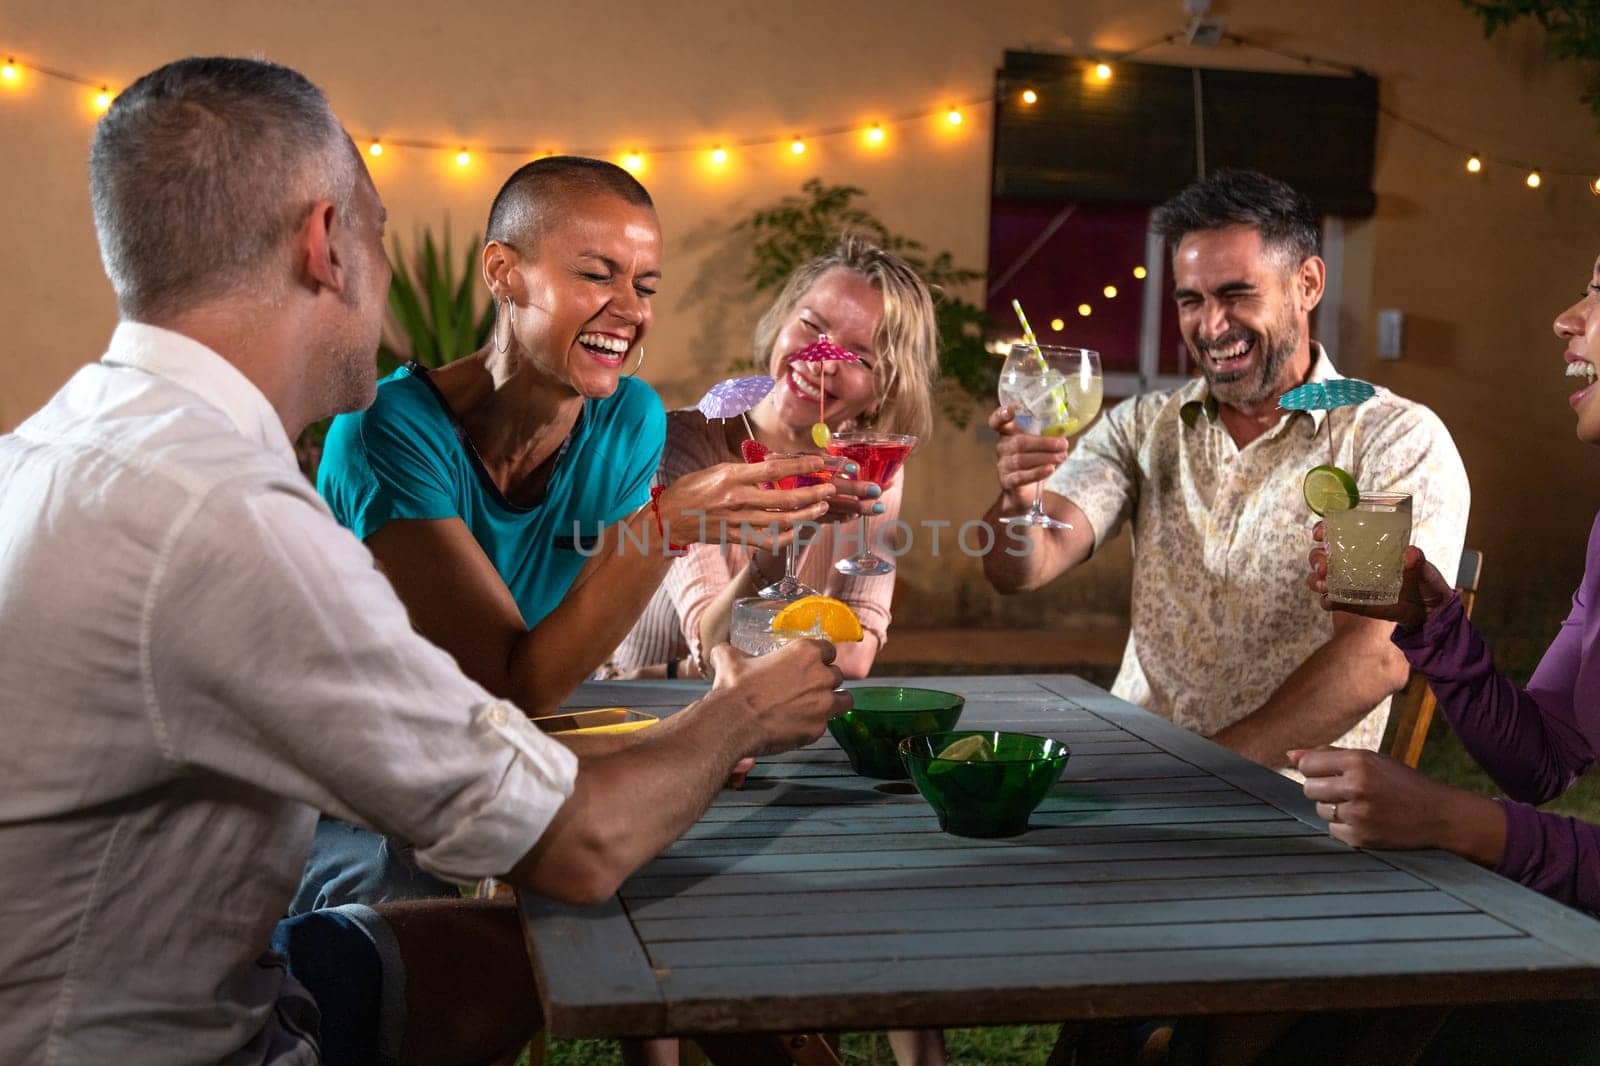 Group of friends enjoying some cocktails after dinner outdoors in the garden. Having fun together and laughing, Lifestyle concept.